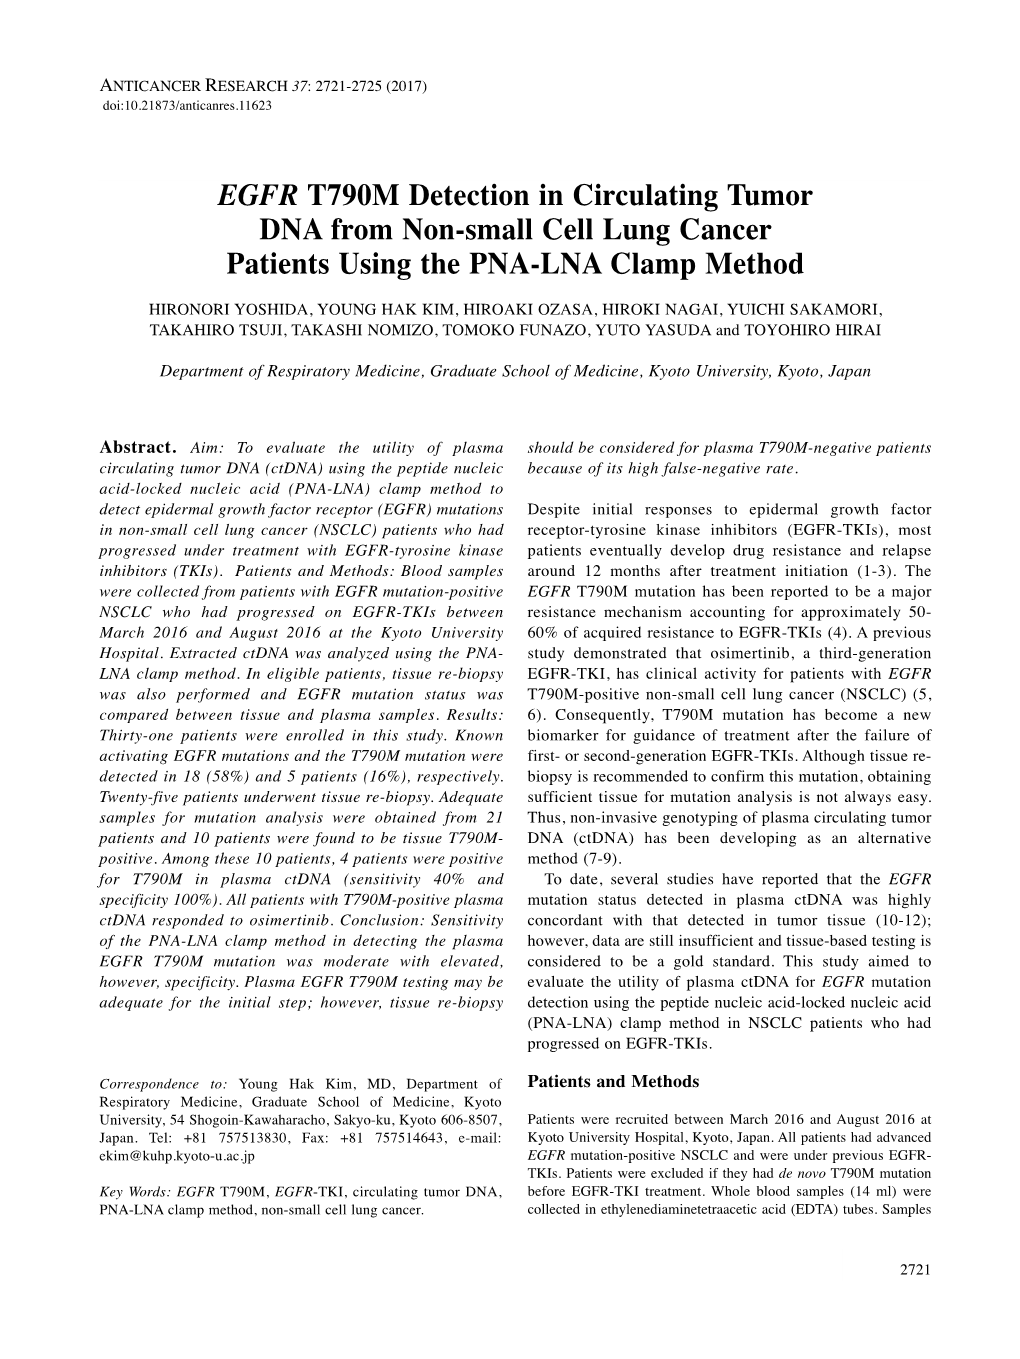 EGFR T790M Detection in Circulating Tumor DNA from Non-Small Cell